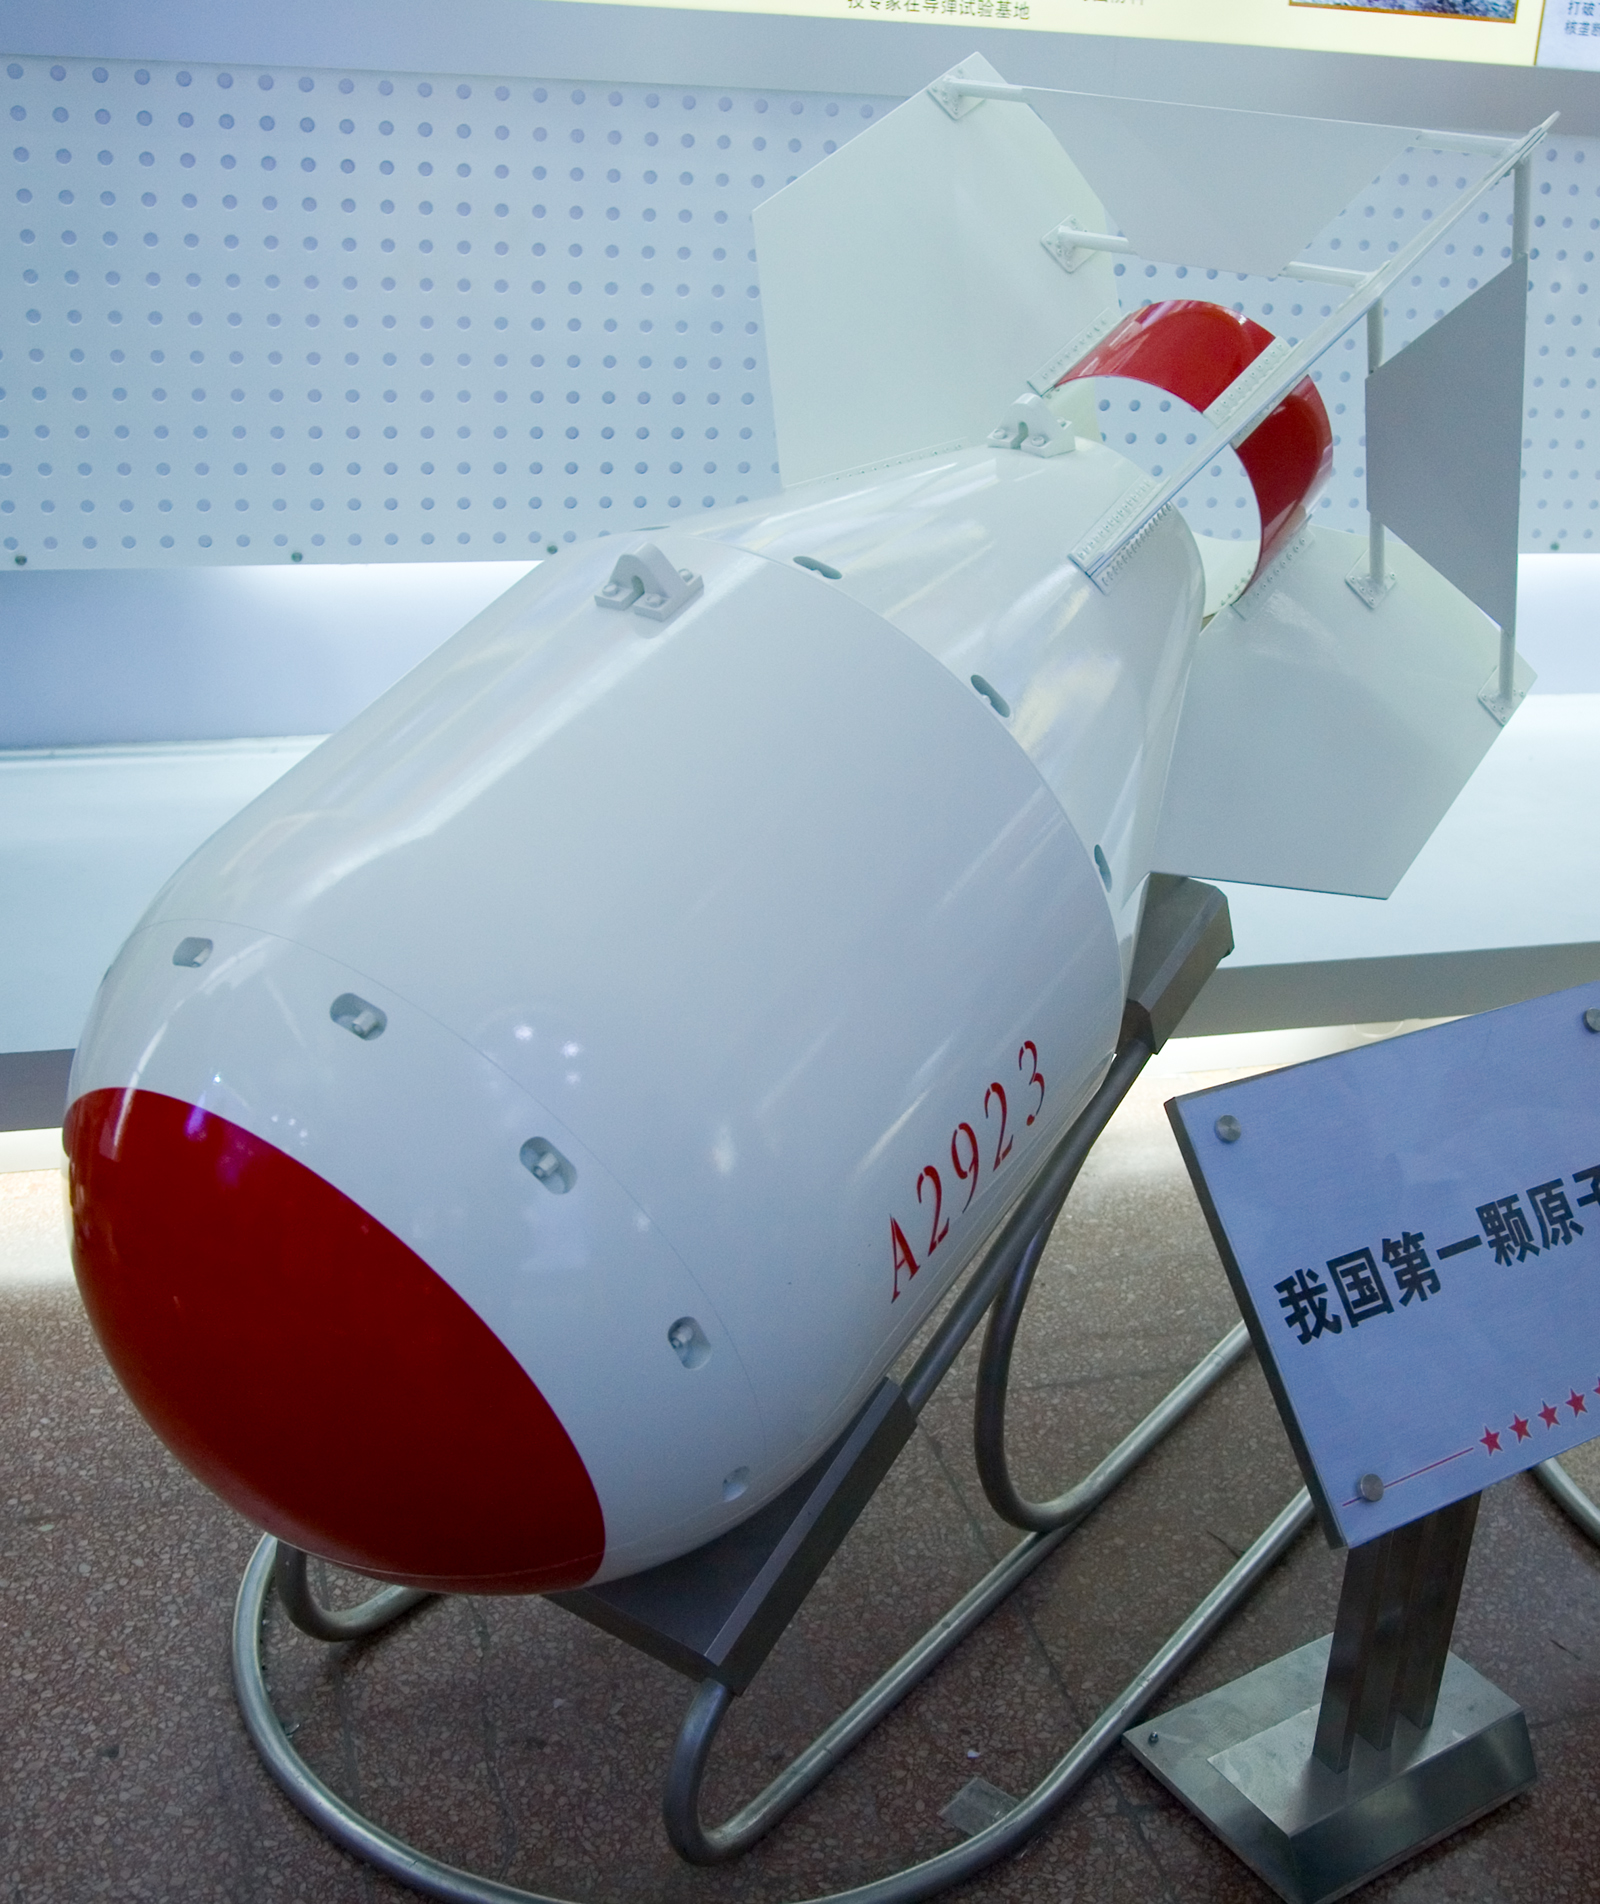 Chinese_nuclear_bomb_-_A2923.jpg